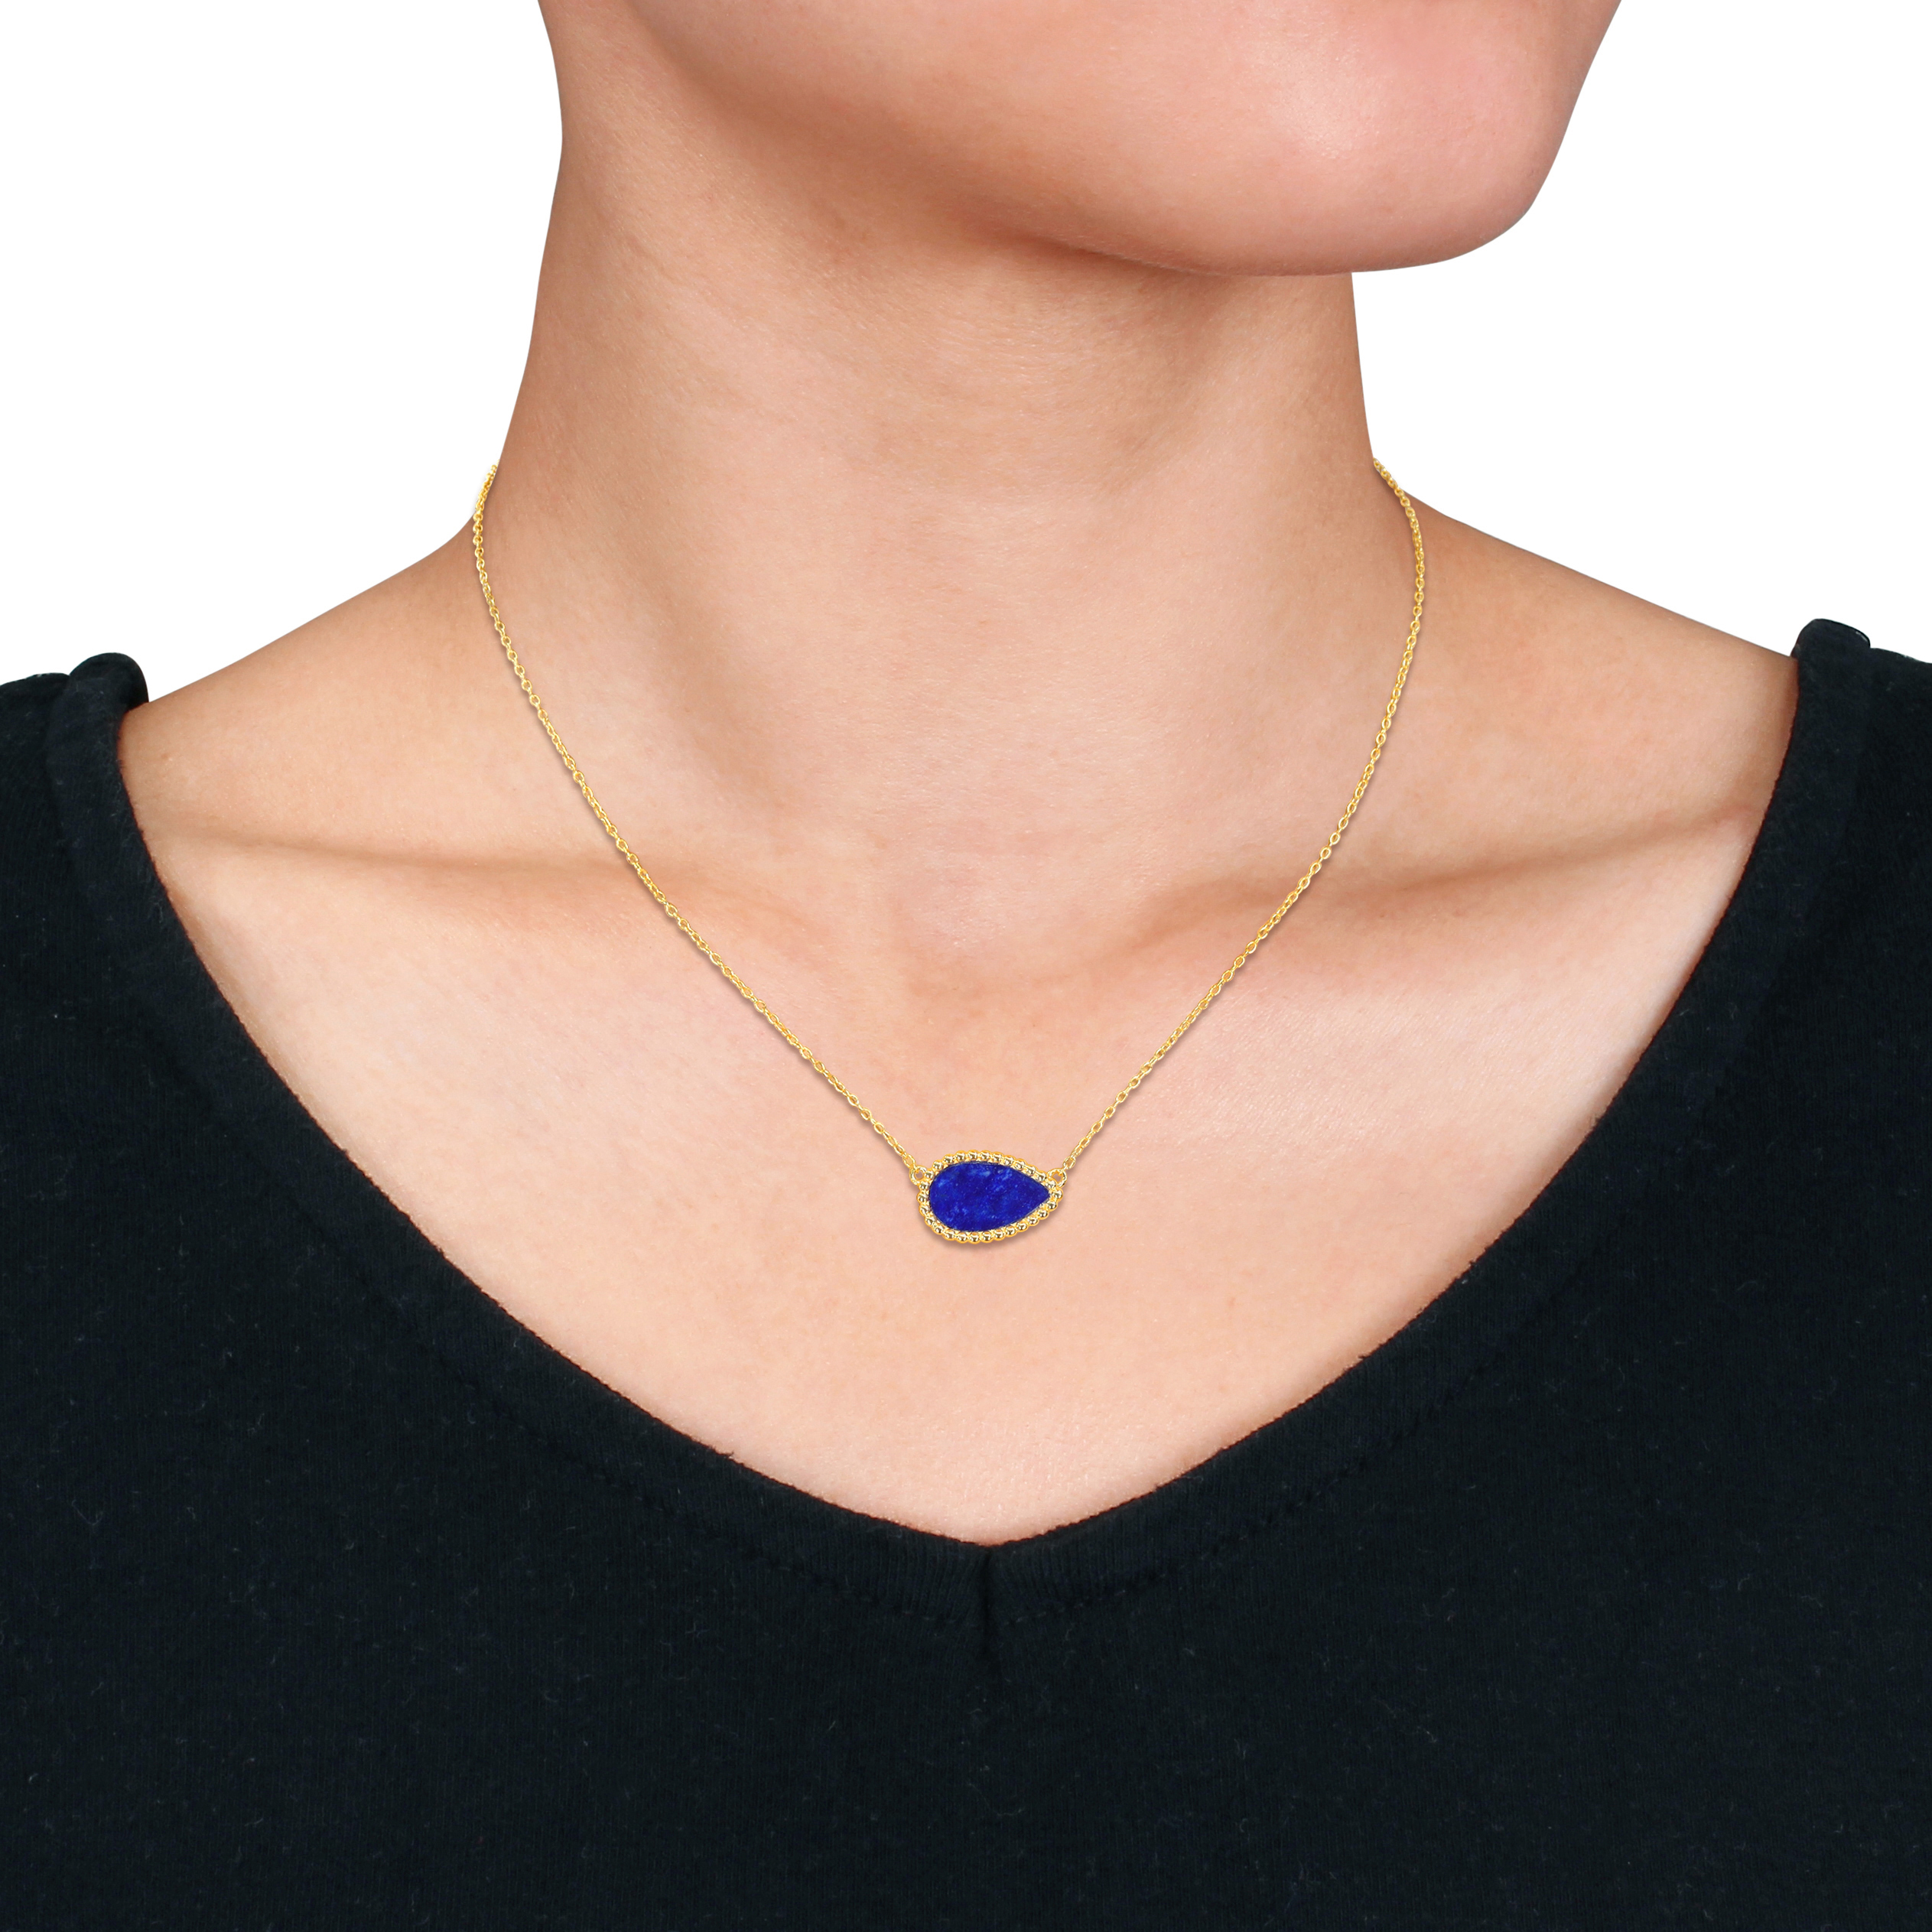 4 CT TGW Pear Shape Lapis Necklace With Beaded Halo in Yellow Plated Sterling Silver - 17 in.